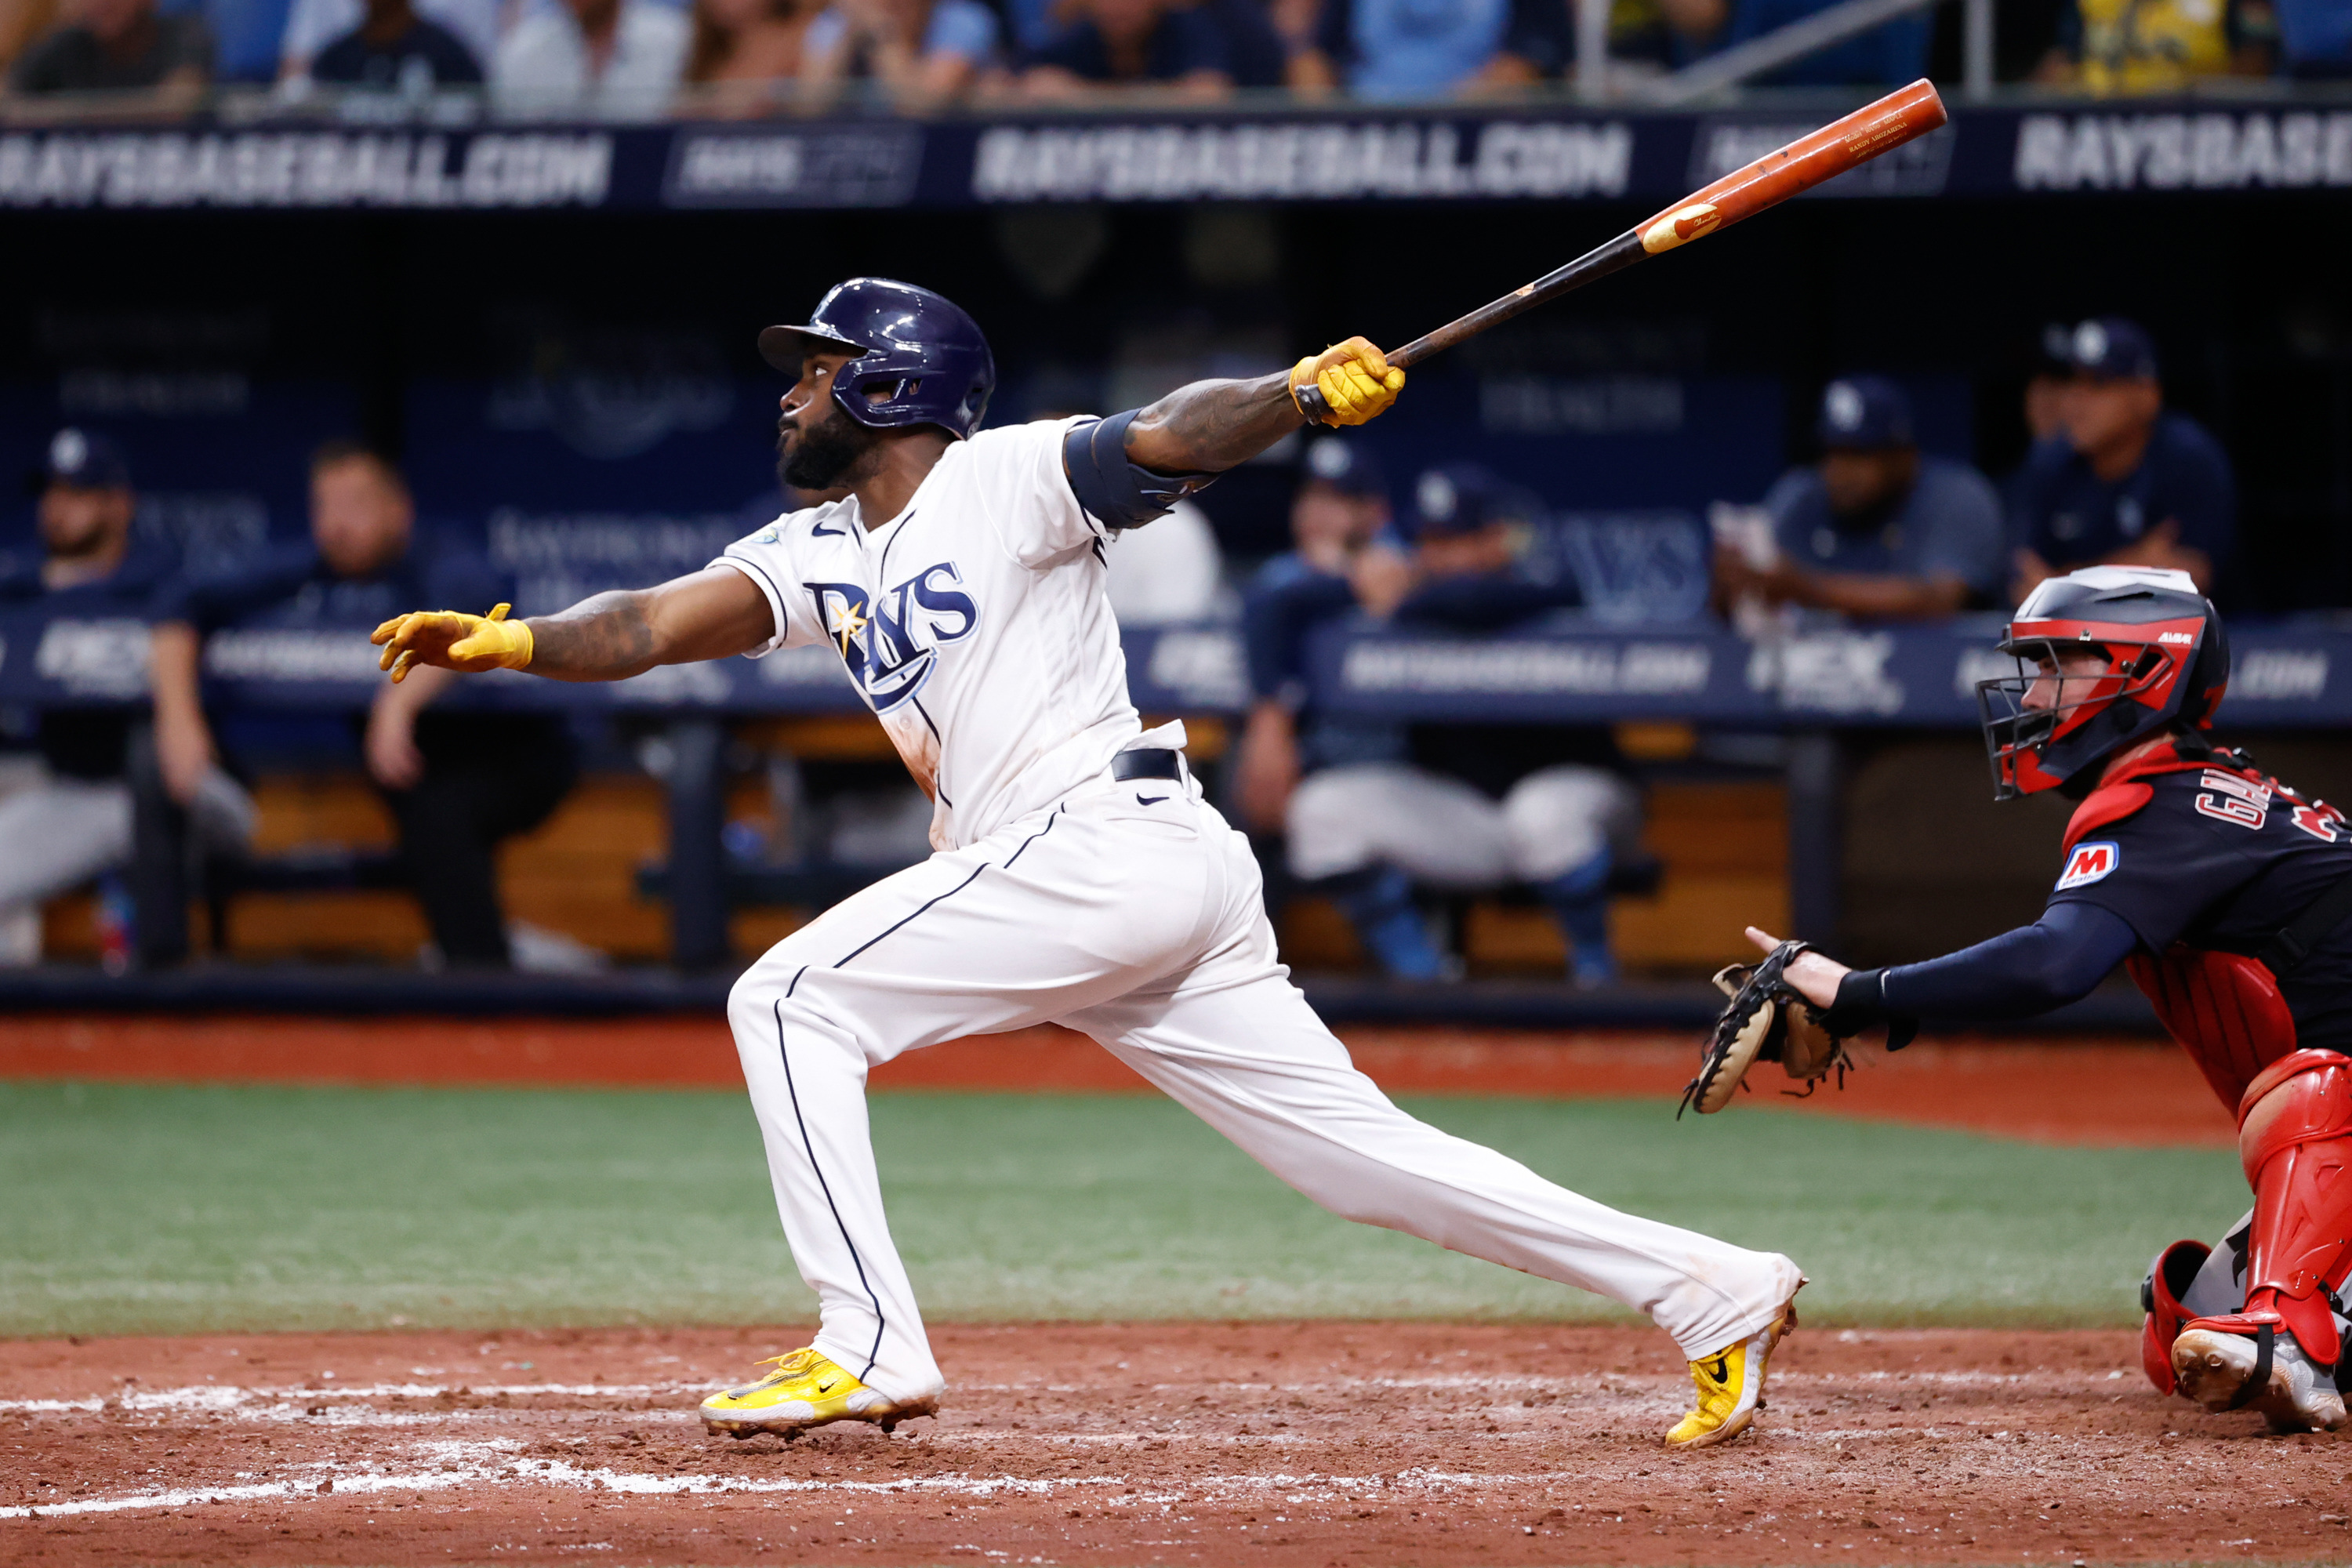 Wander Franco's walkoff homer leads Rays past Guardians